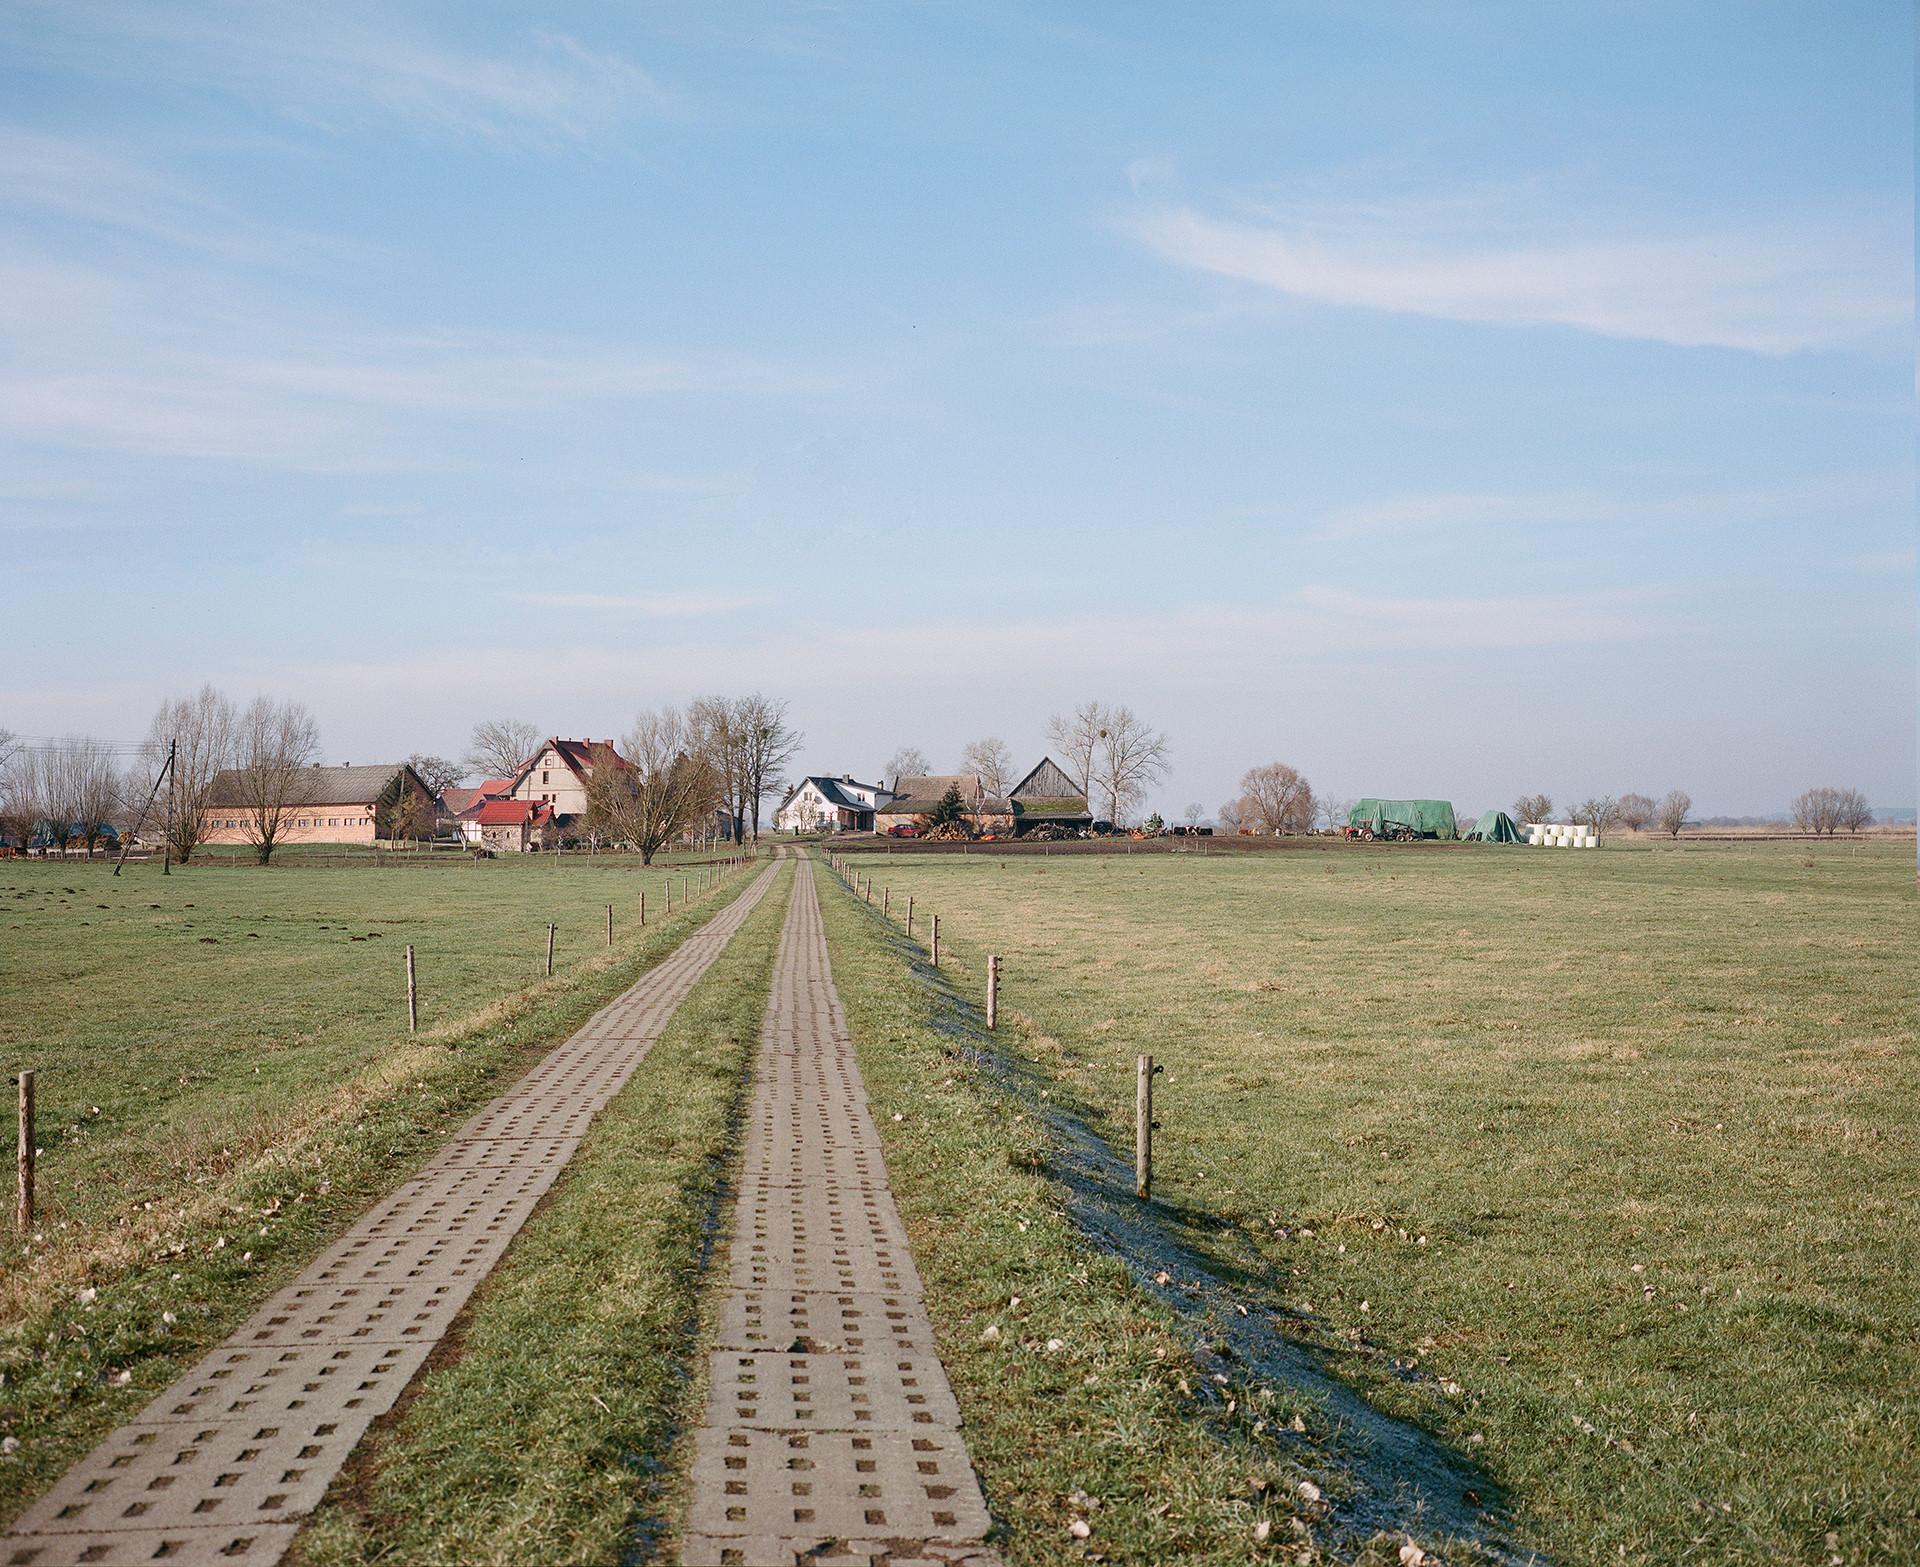 Jamno, Poland, formerly Jamaika, a village founded, along with tens of other settler villages with similar ‘exotic’ names, on reclaimed land as part of the Friderician colonization in the late 18th century